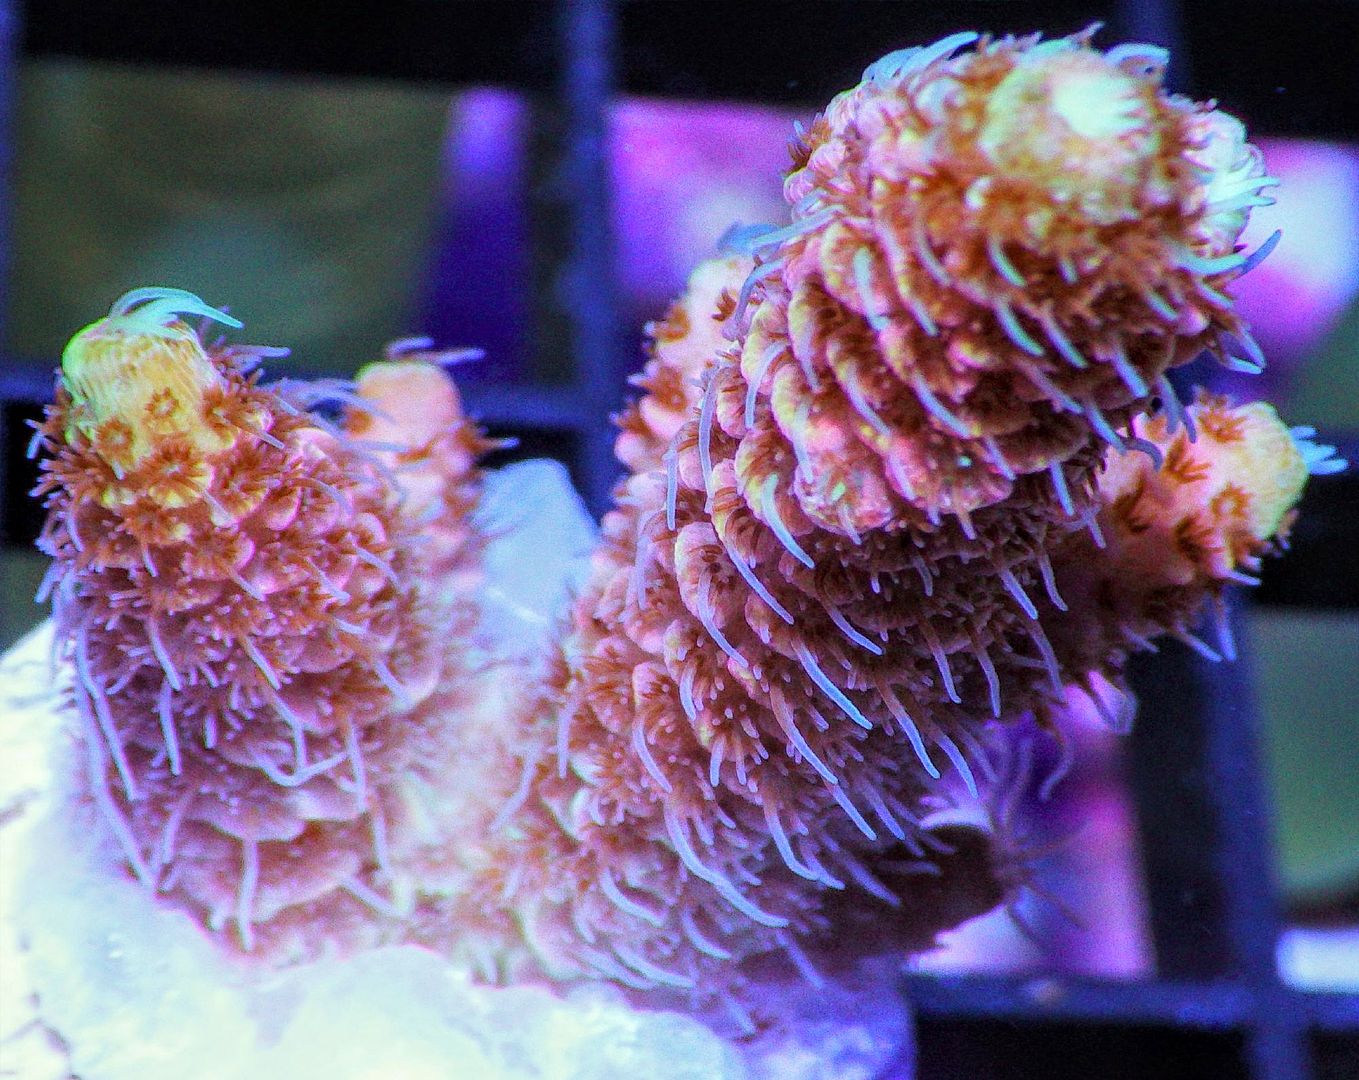 48hairyacropora242 zpsqmol6ccf - Bargain Frags JUST POSTED